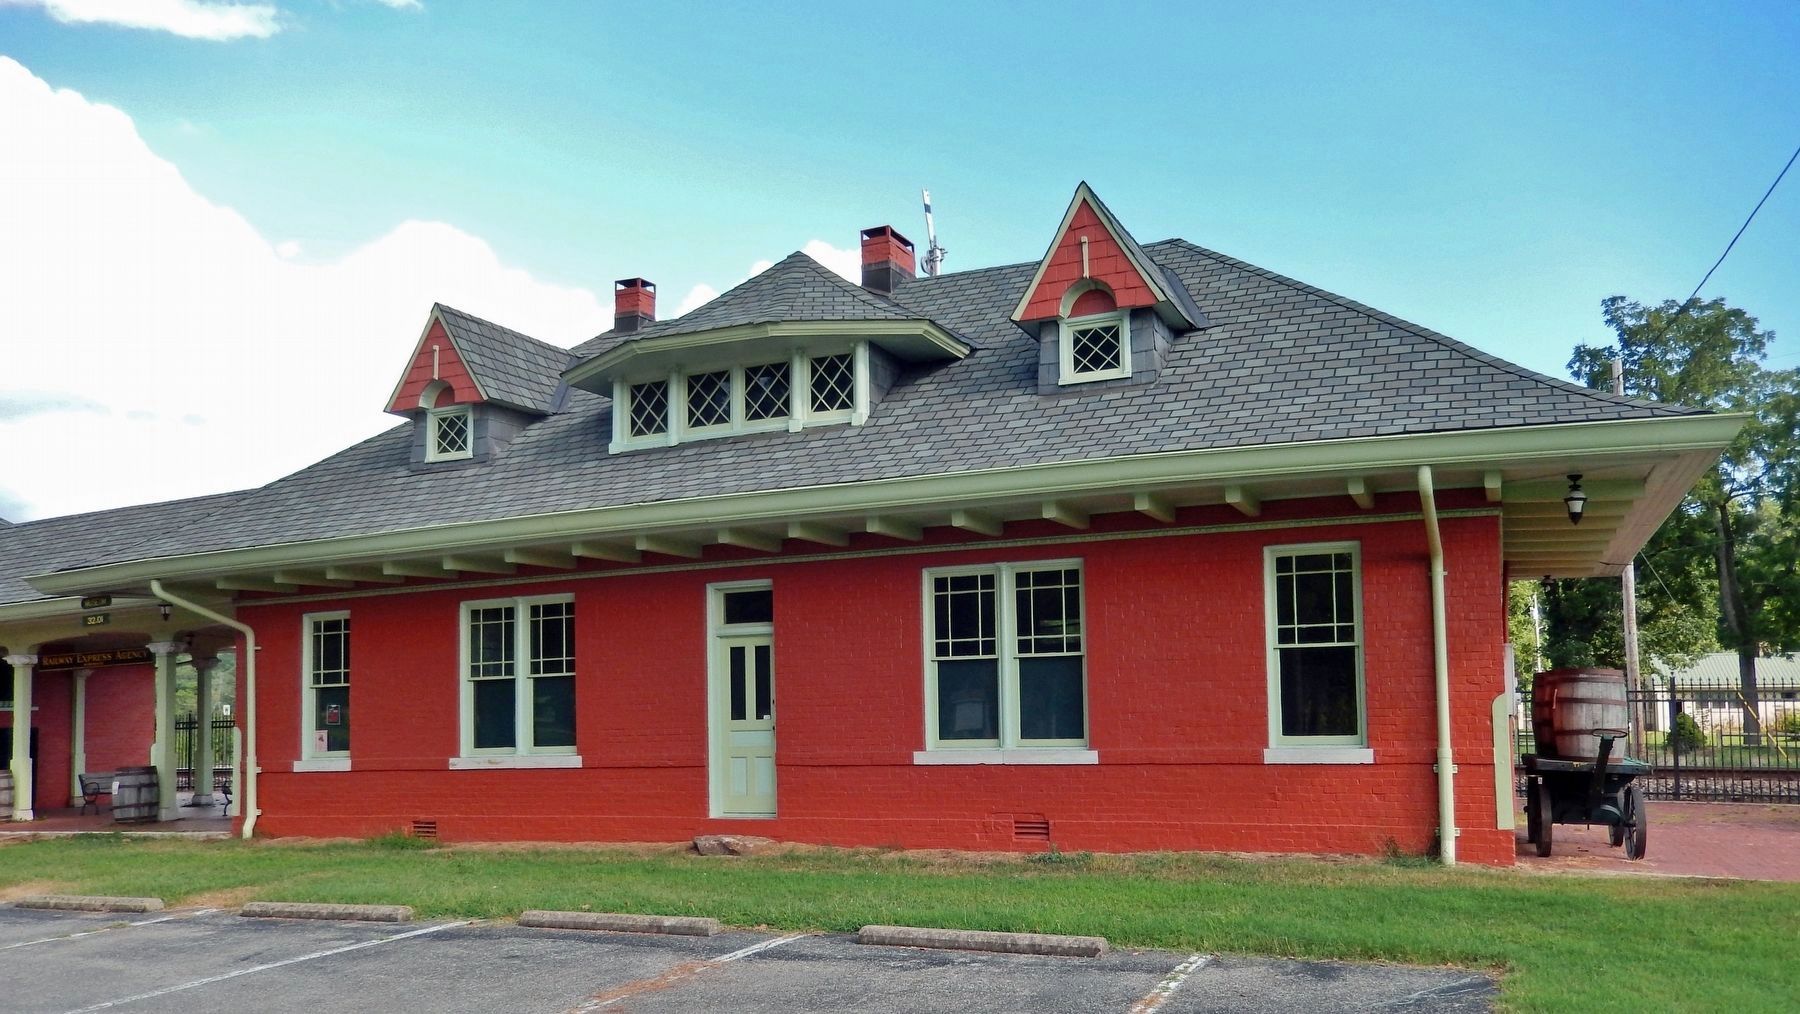 Mammoth Spring Depot Architecture image. Click for full size.